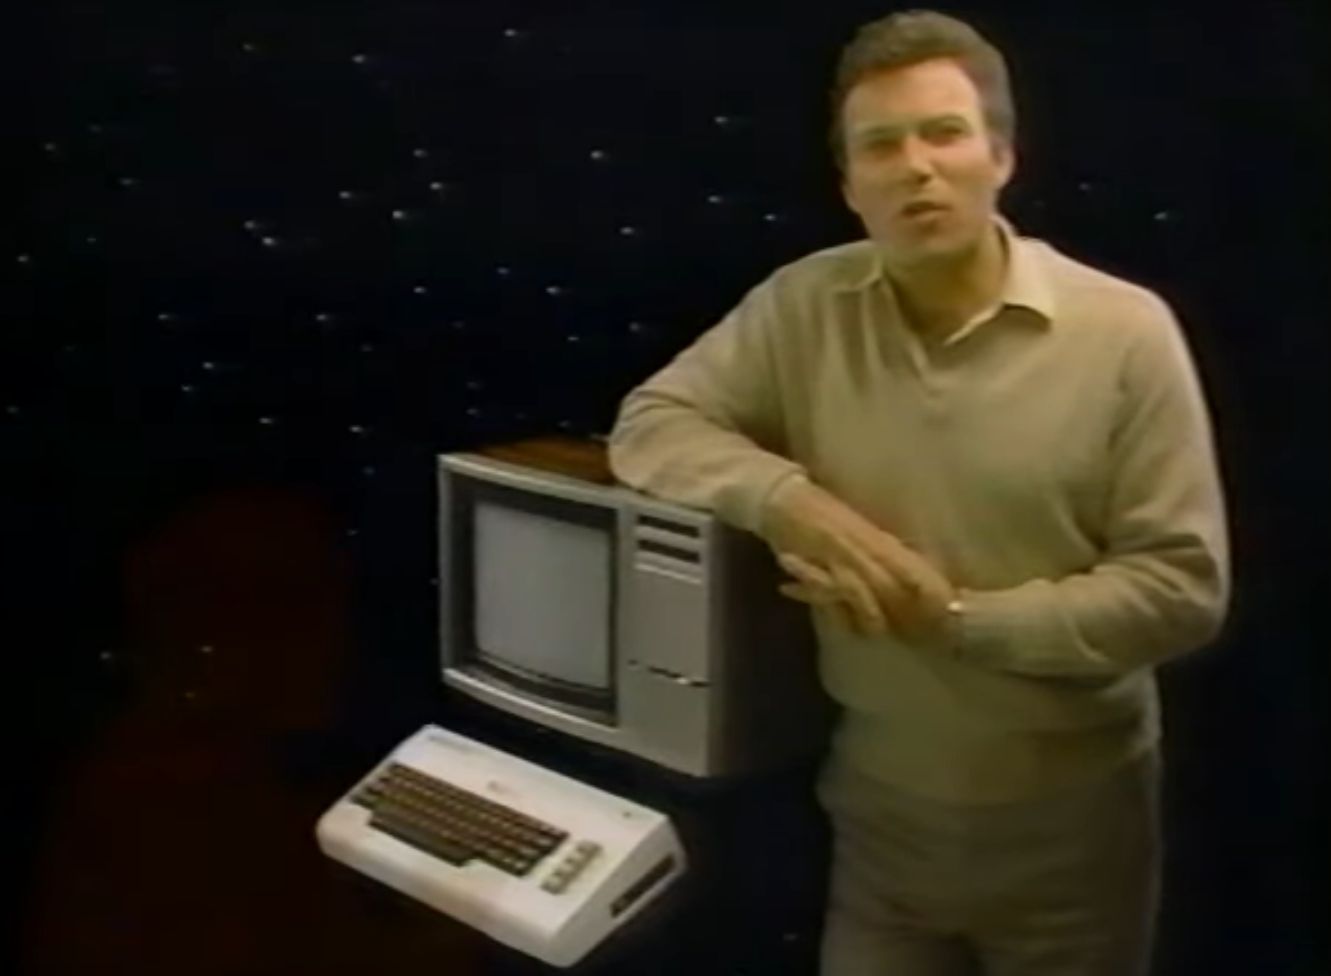  Great moments in PC gaming: Playing on the first mass-market PCs in the 1980s 